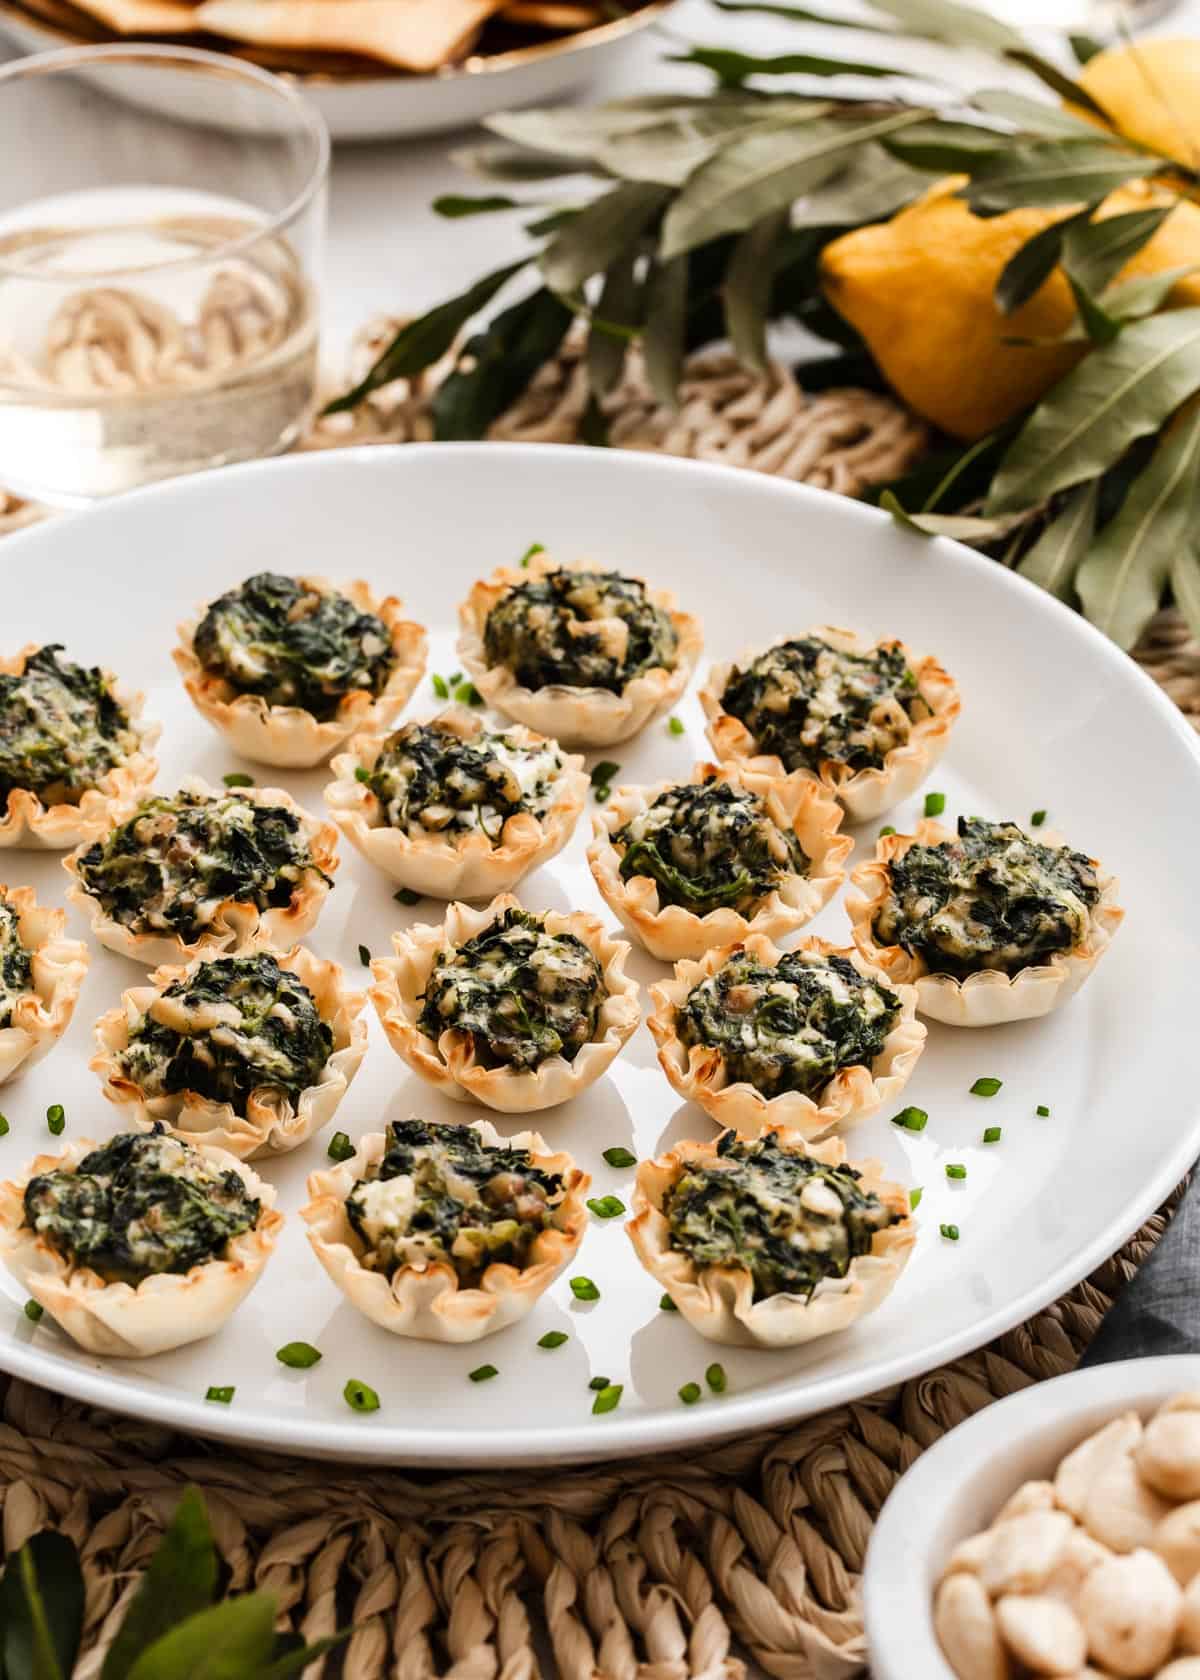 phyllo shells appetizers with spanakopita filling, on white platter with wine and lemons in background.